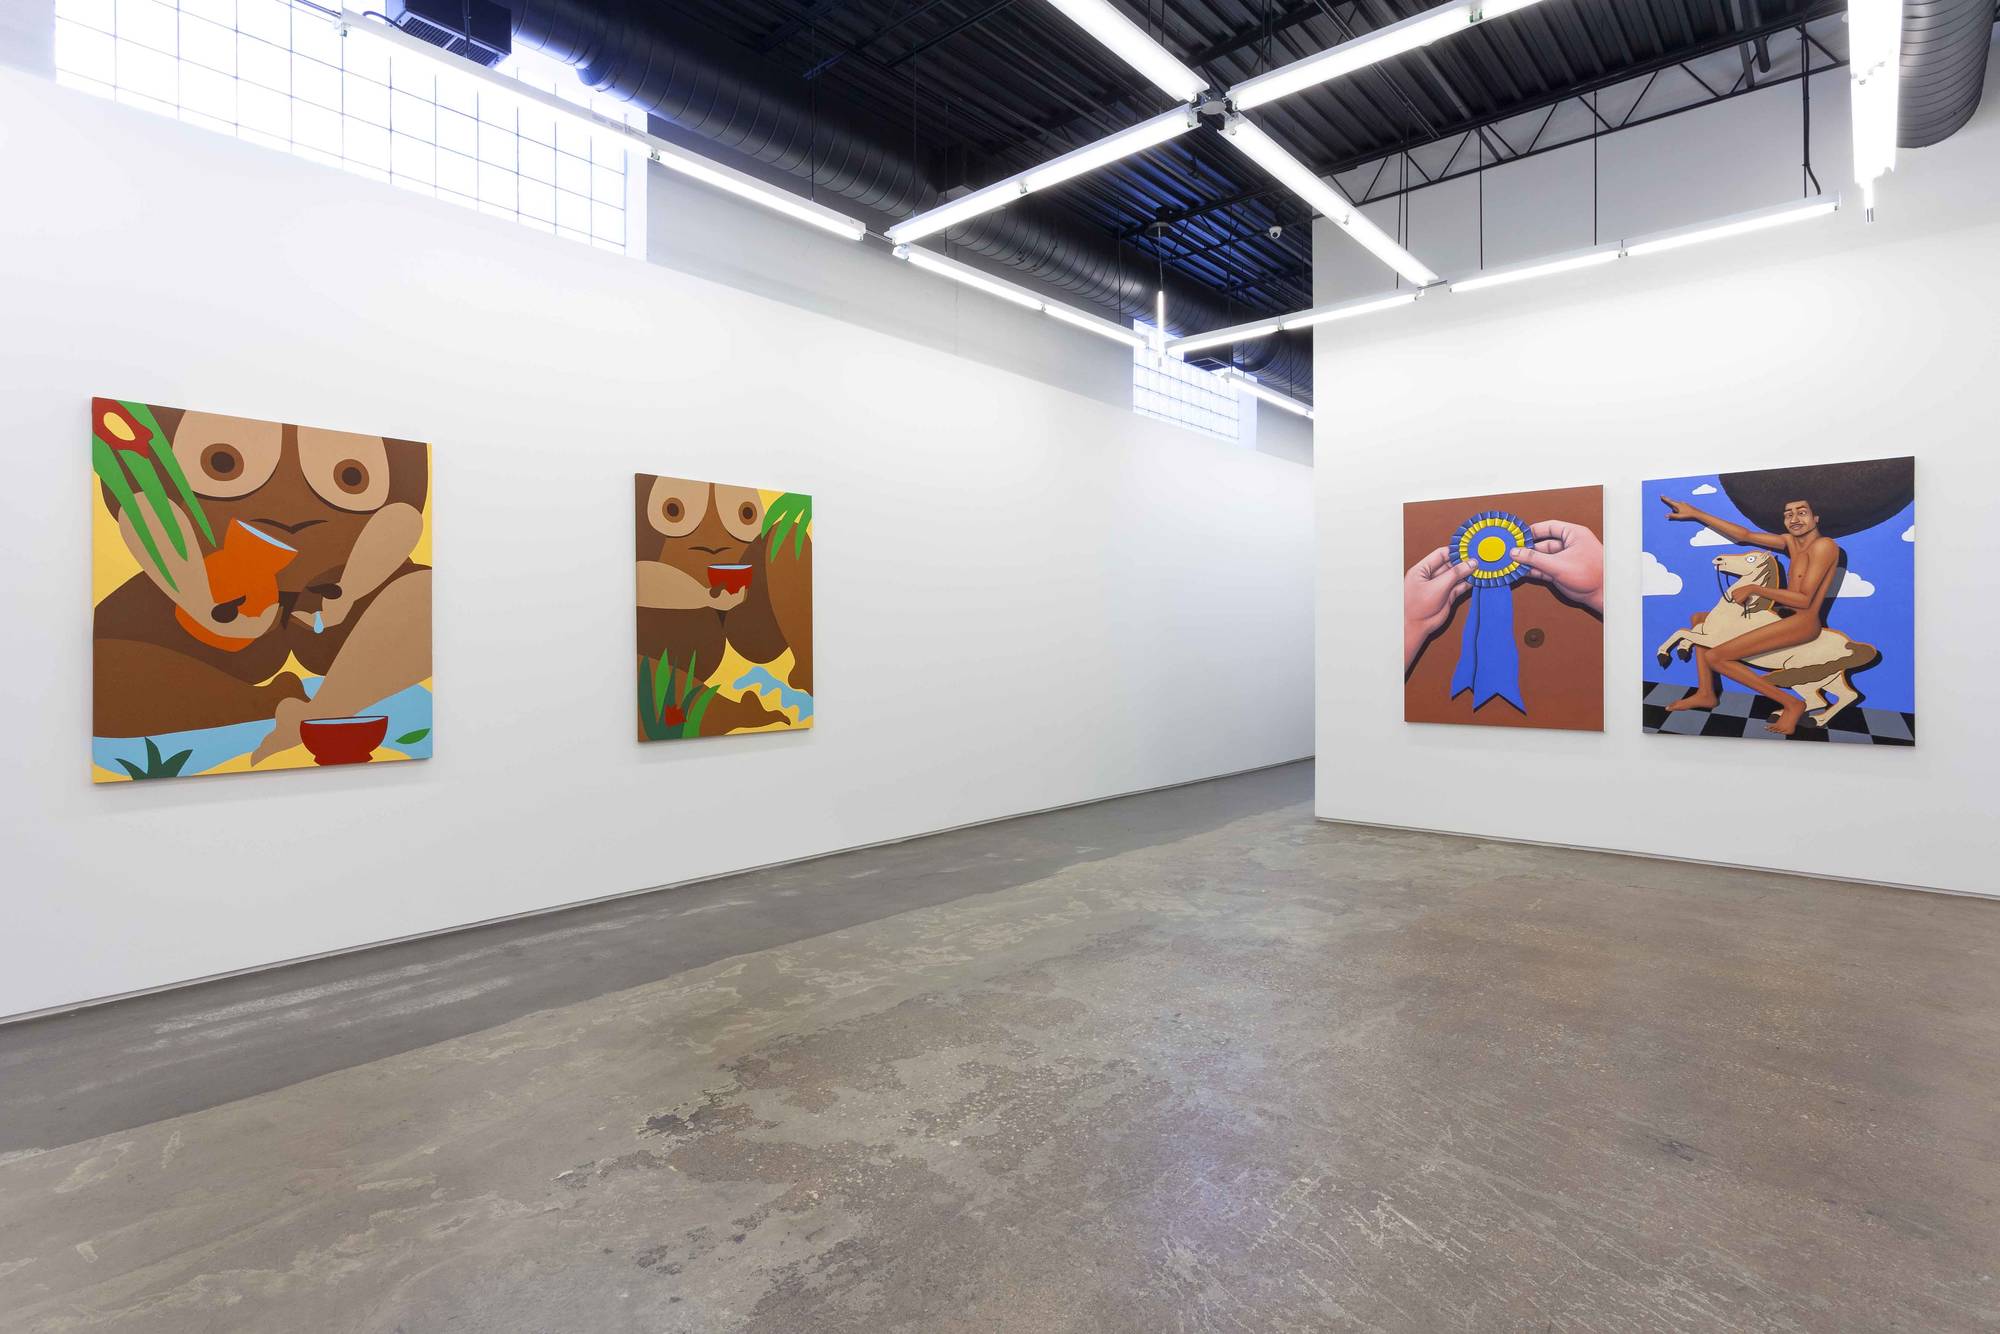 Installation view, Show Me Yours, 2019. Courtesy of Monique Meloche Gallery, Chicago. Photo: RCH Photography.